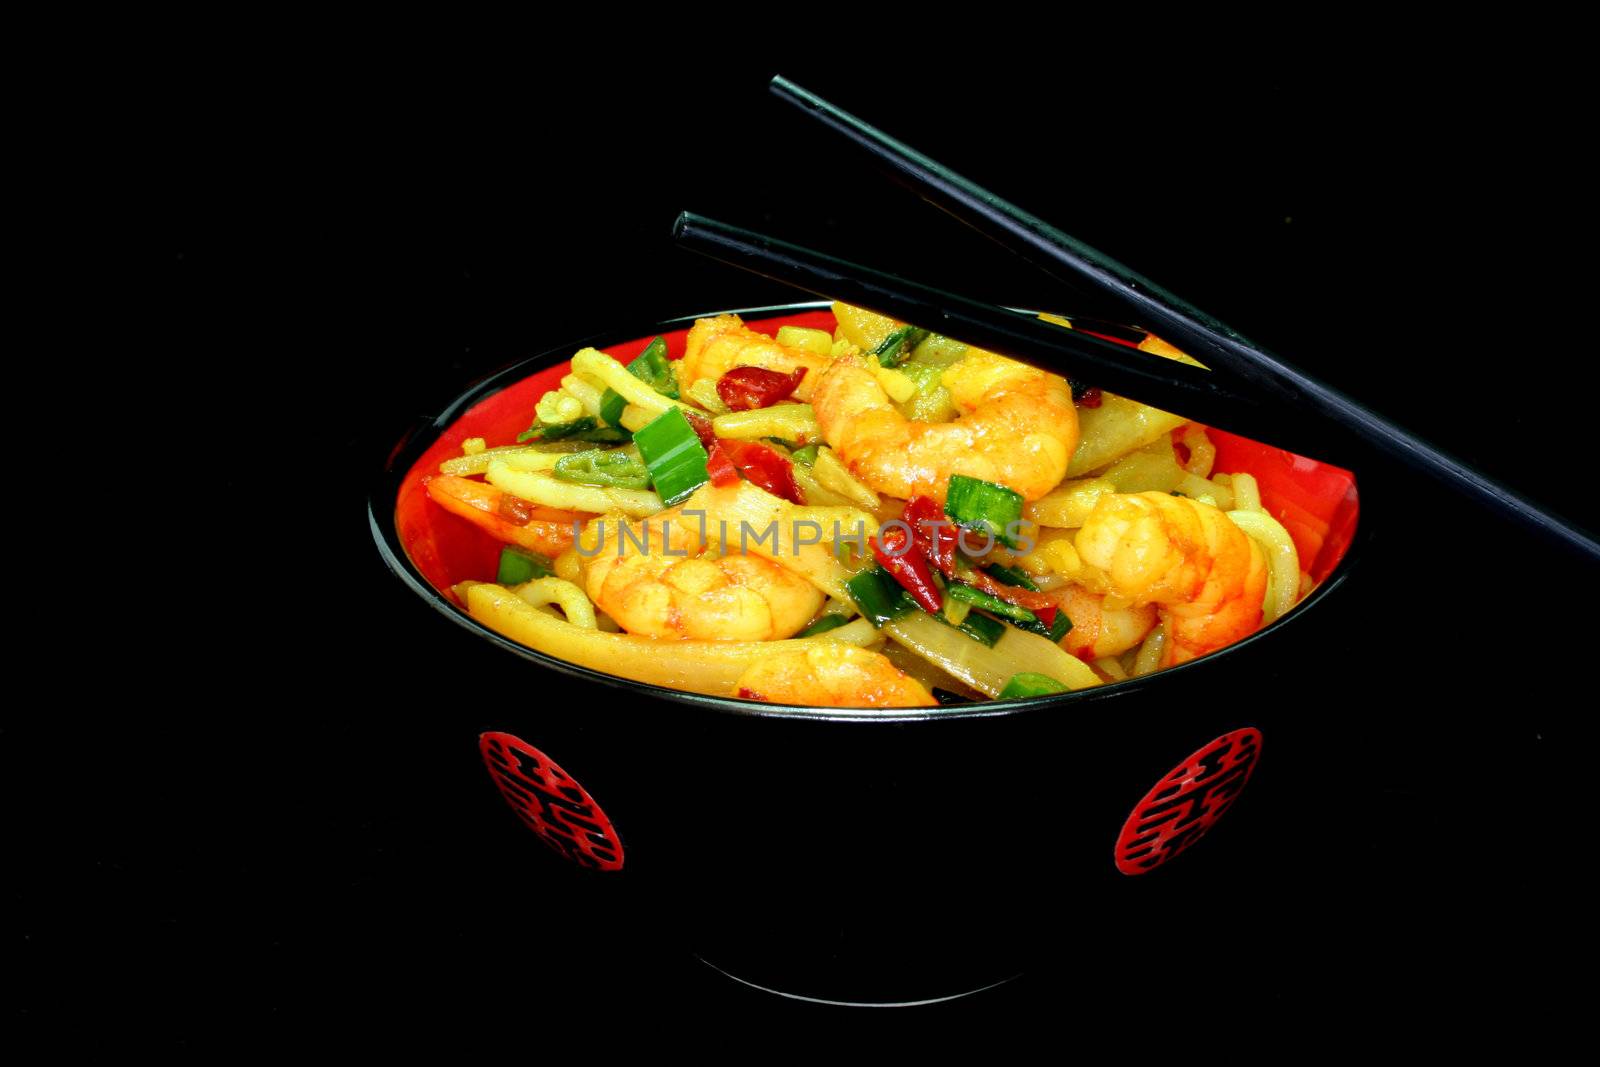 Pasta with shrimp Asia by silencefoto